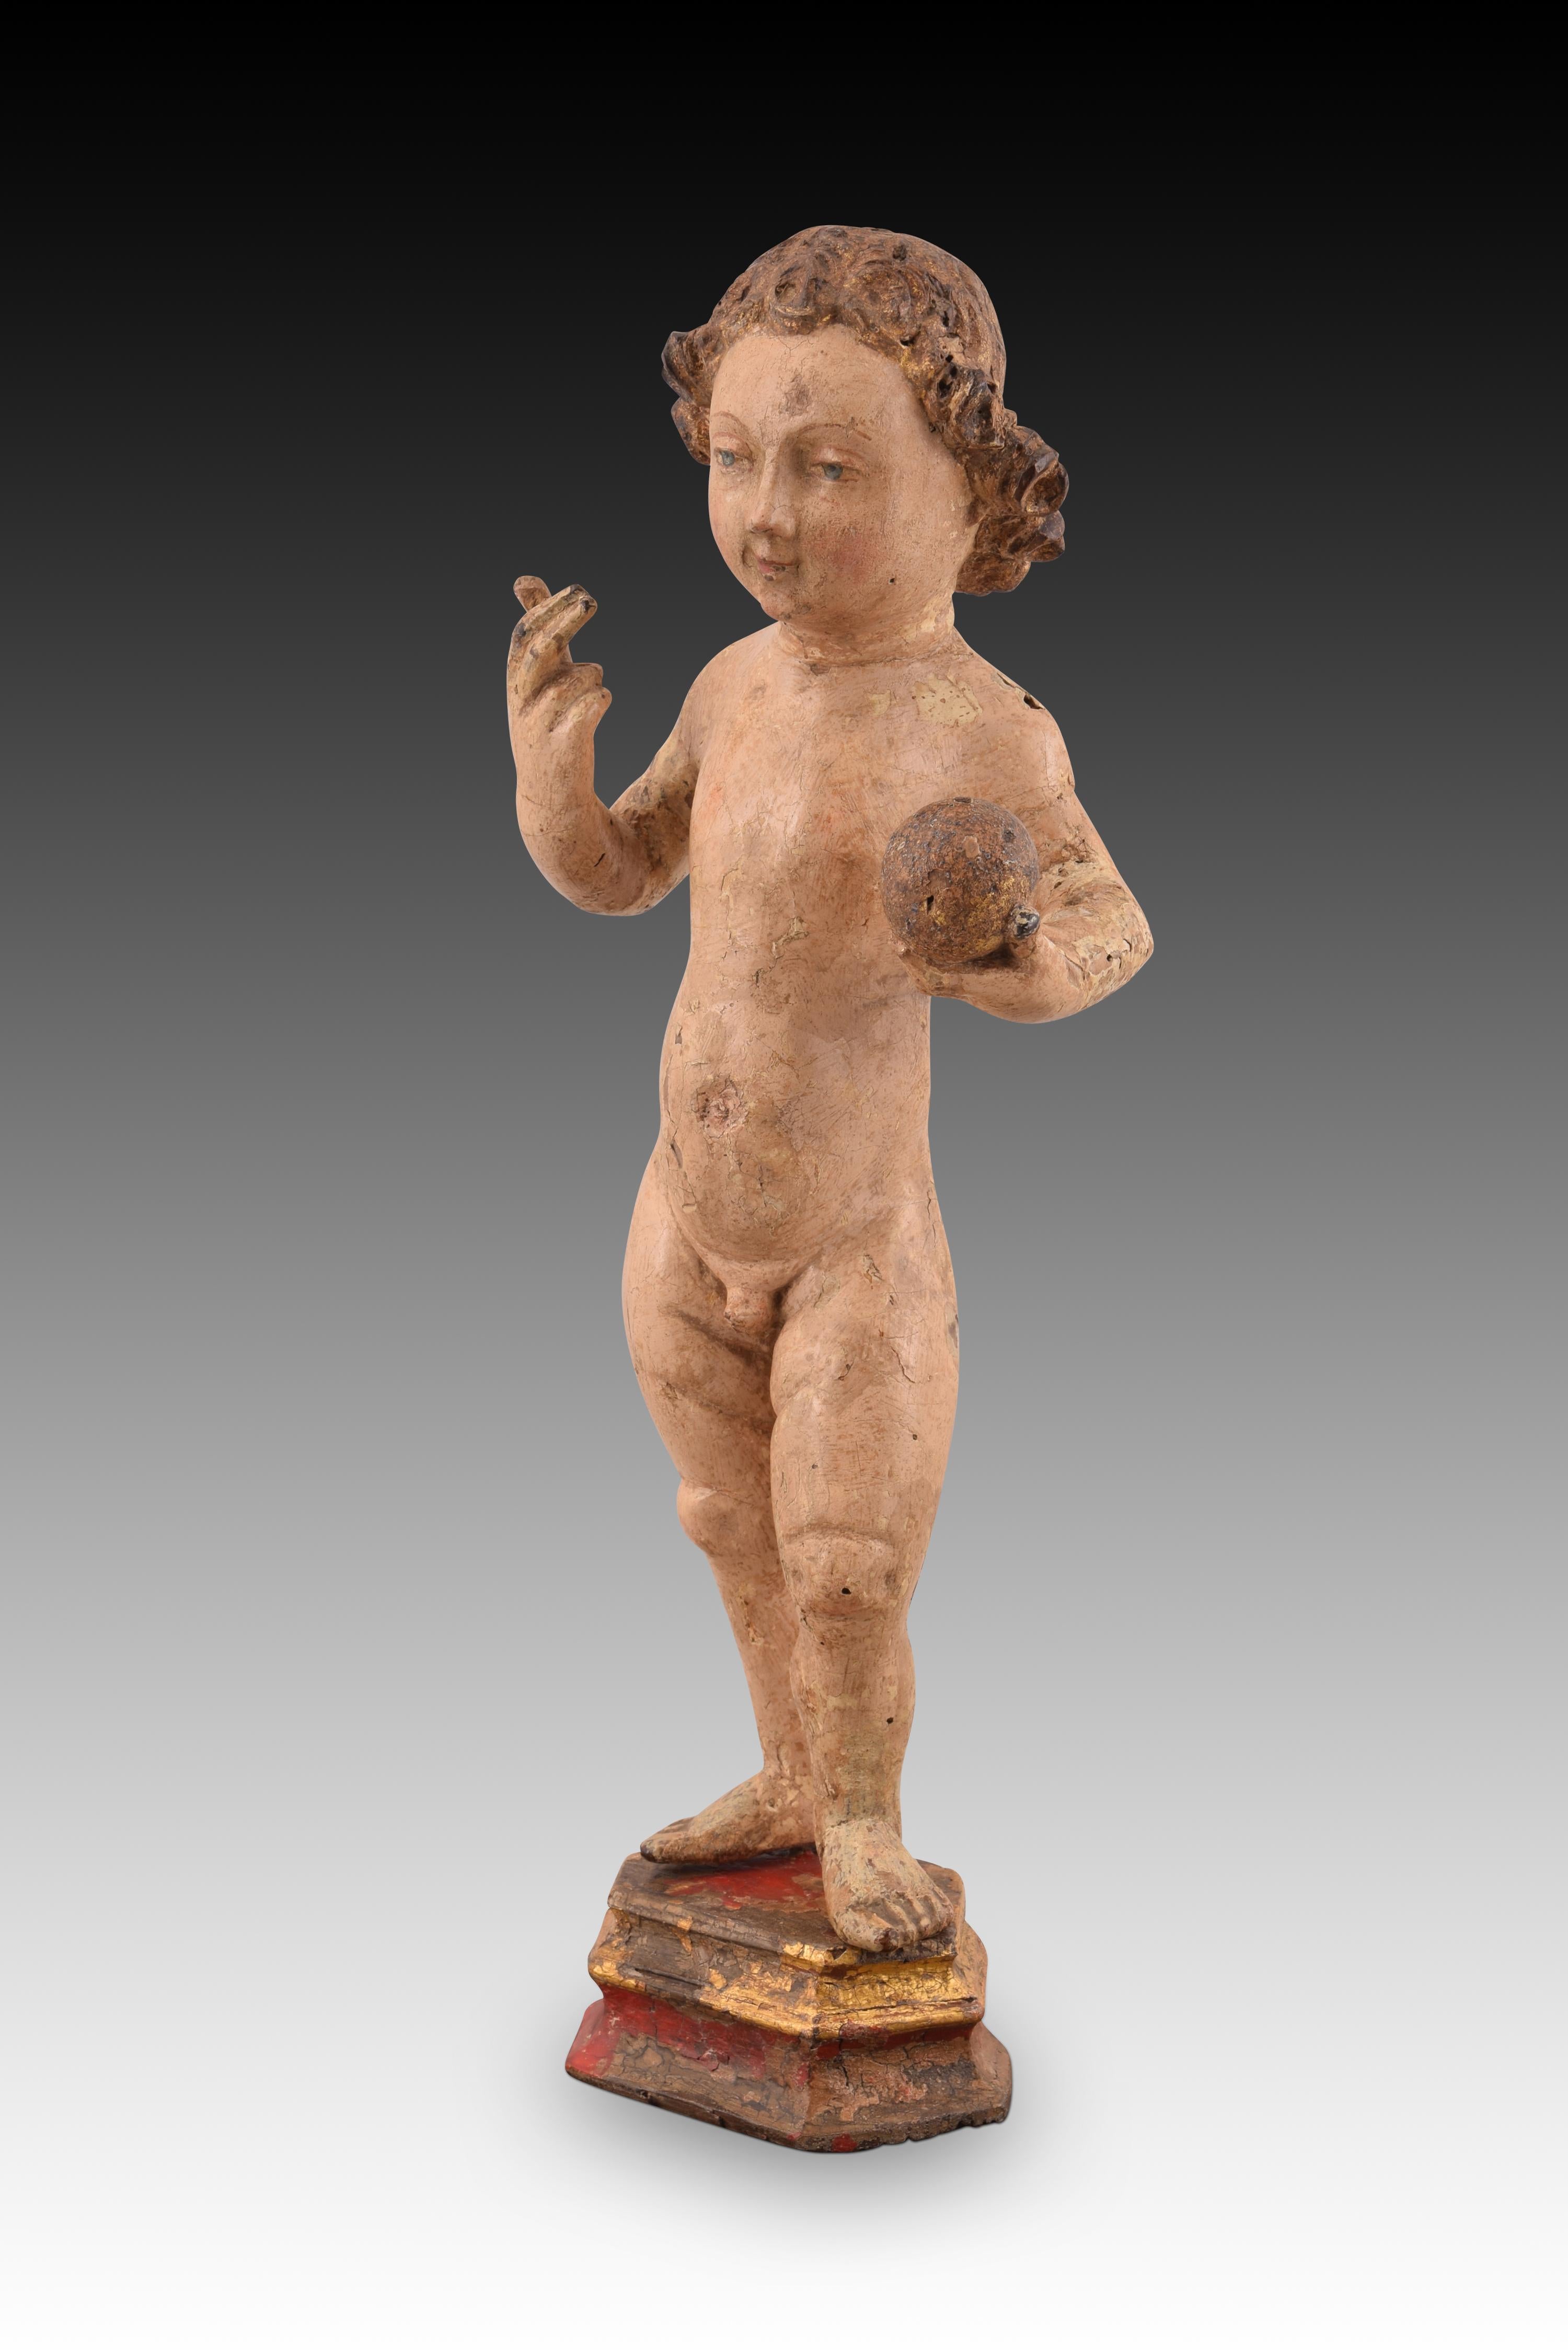 Child Jesus. Carved and polychrome wood. Flemish school, towards the first half of the 16th century. 
Presents restorations. 
Baby Jesus with polygonal base made of carved and polychrome wood. The figure is presented naked, standing, with the right